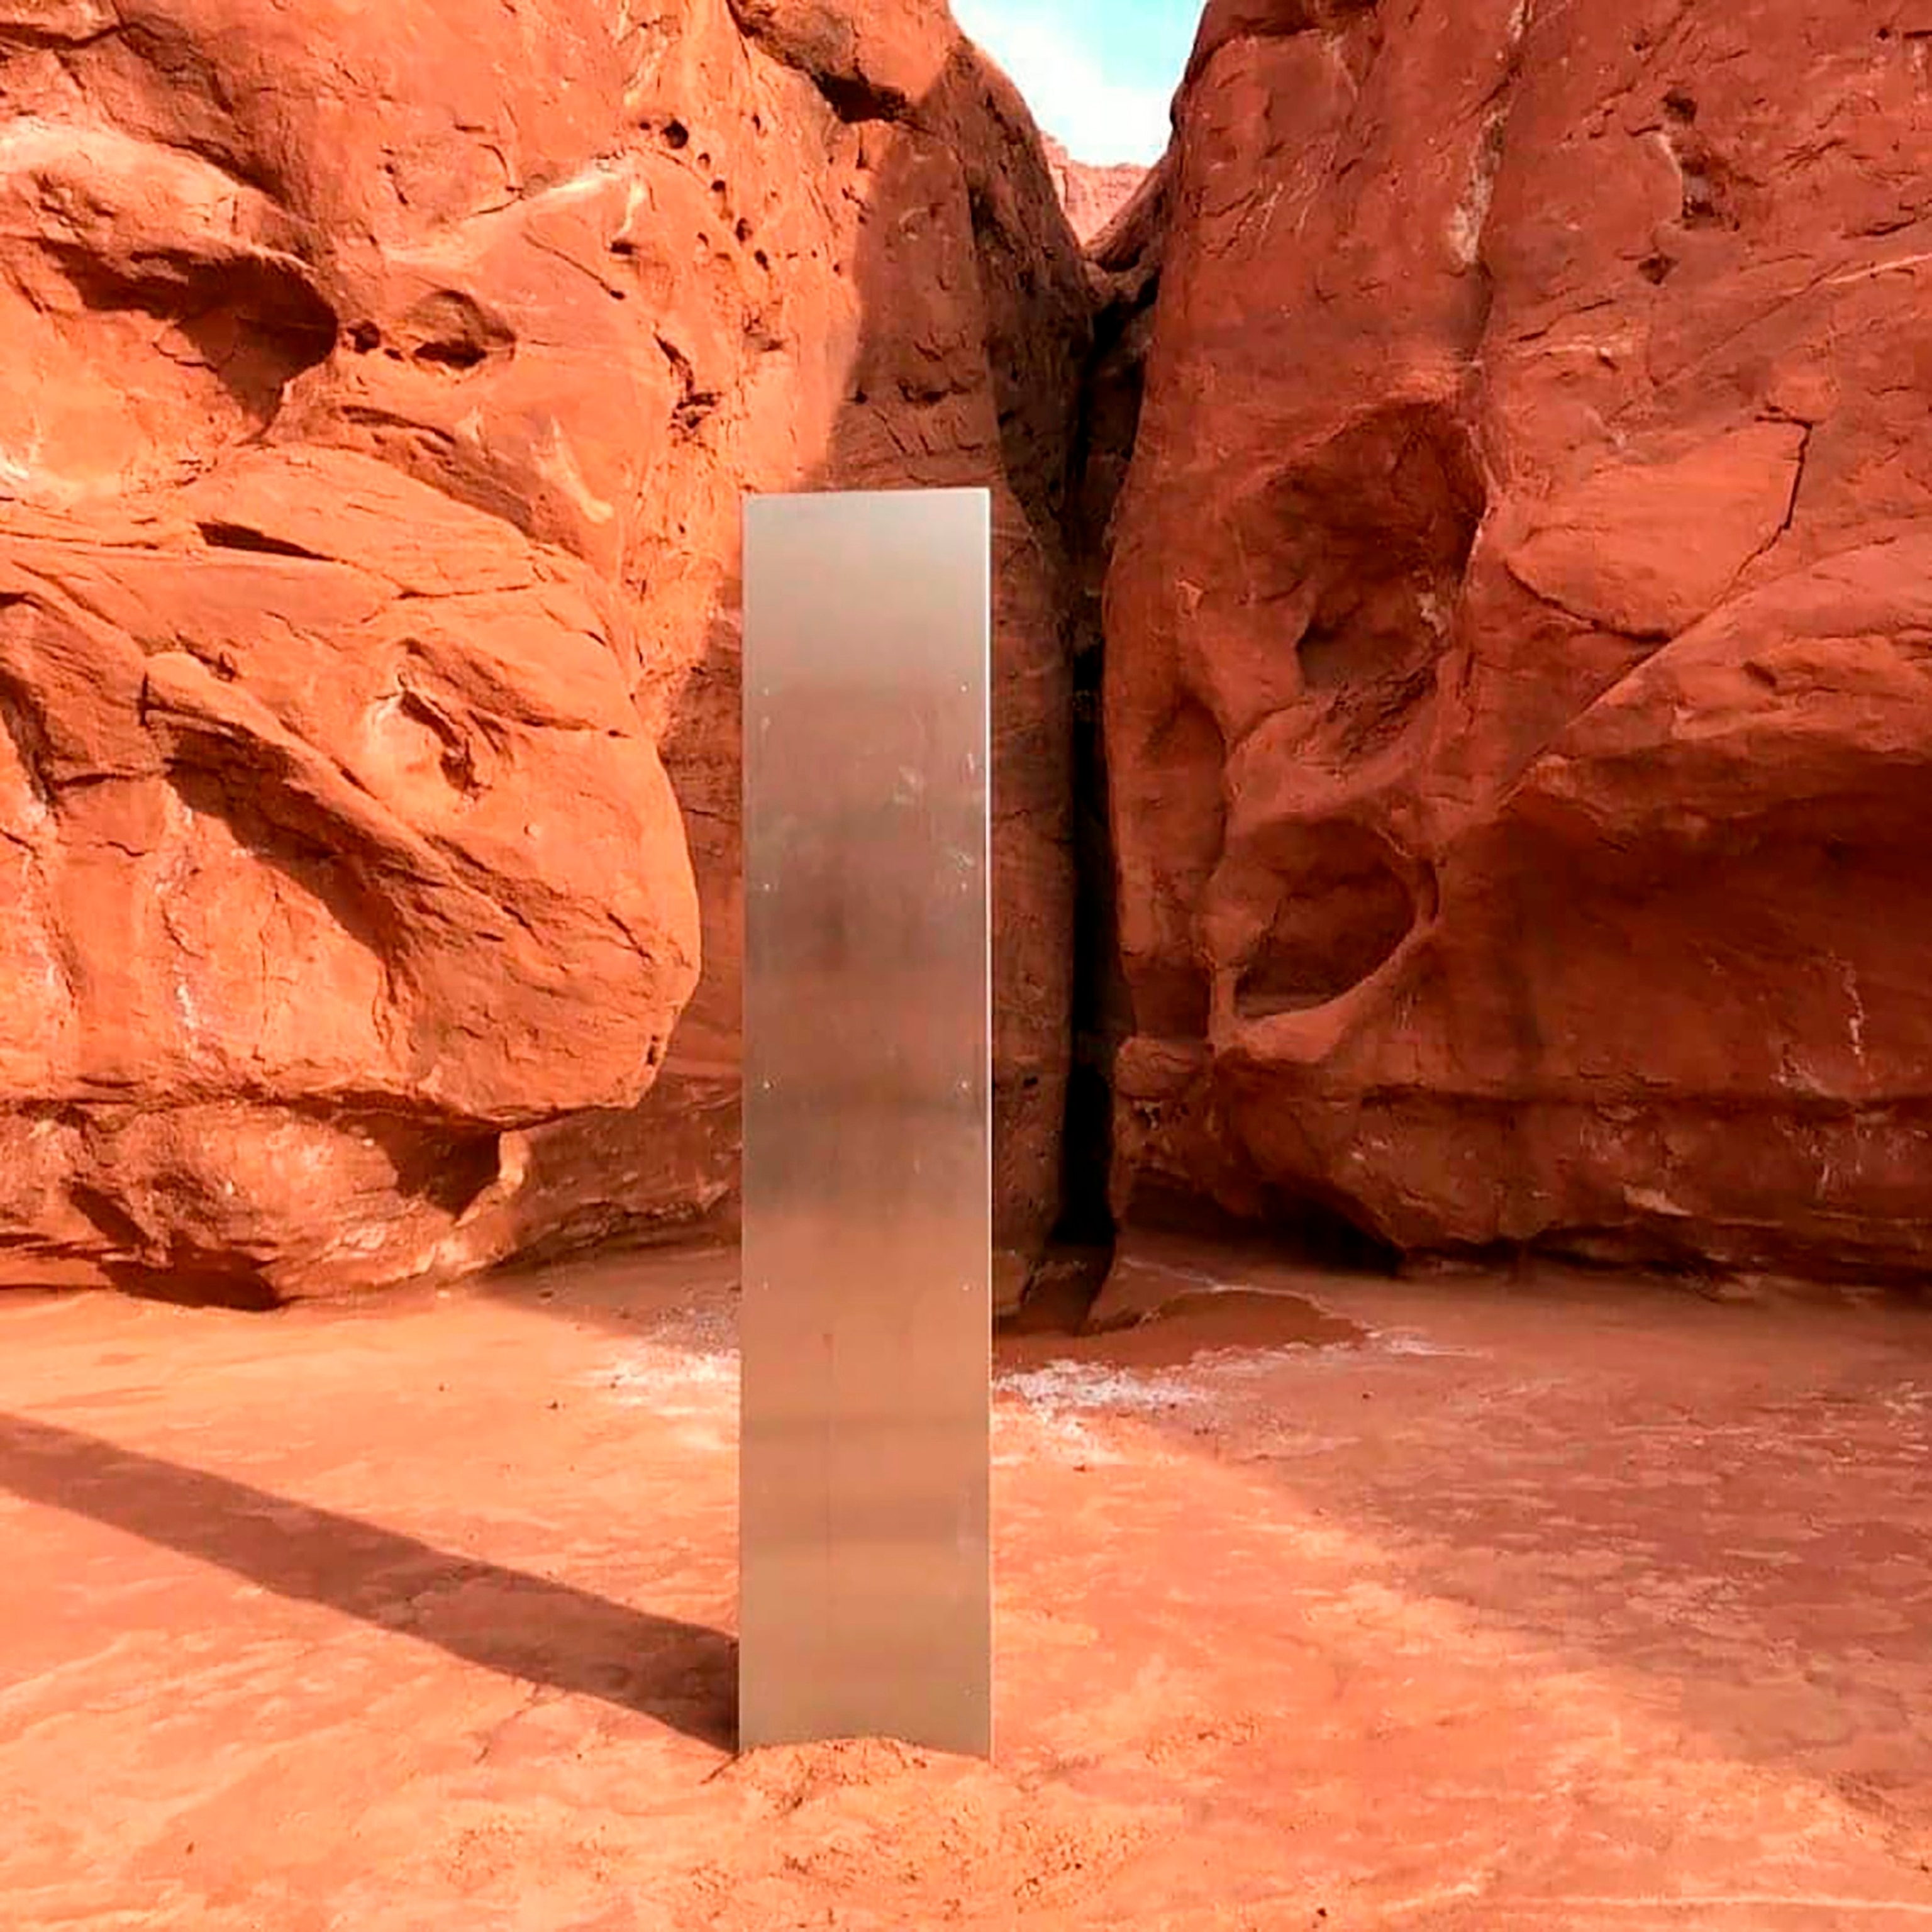 PHOTO: This Nov. 18, 2020, file photo provided by the Utah Department of Public Safety shows a metal monolith in the ground in a remote area of red rock in Utah.